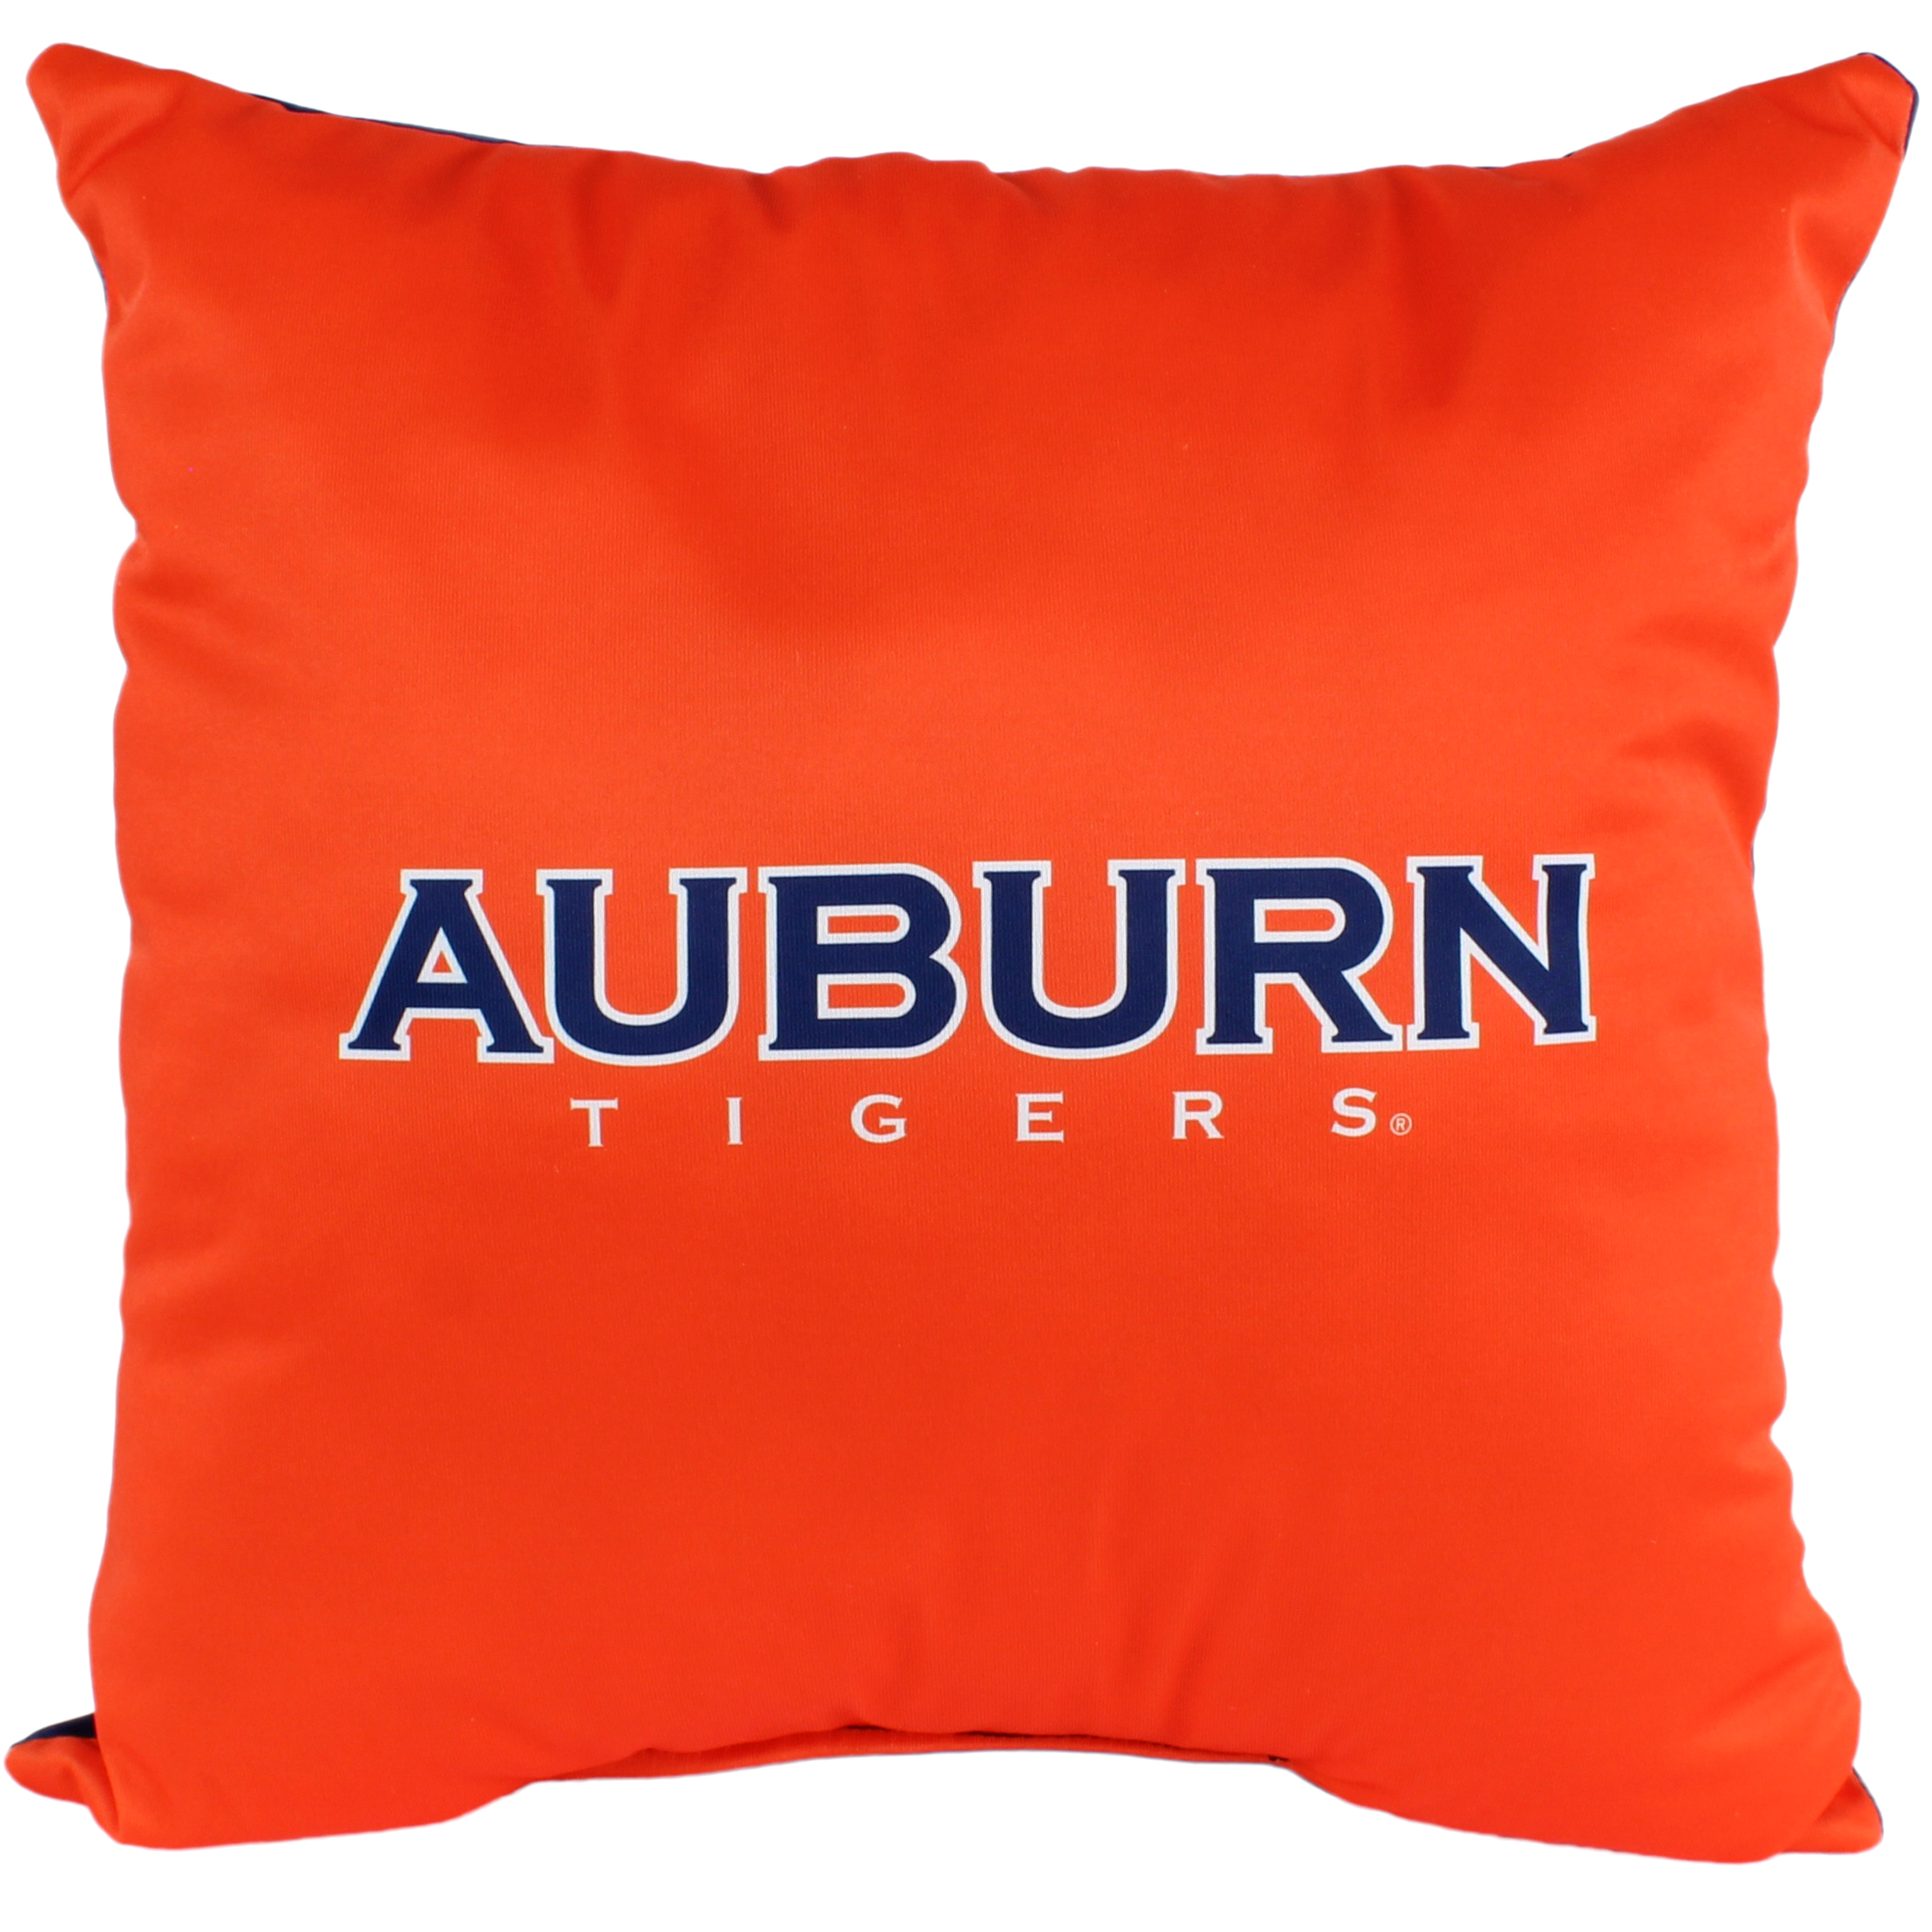 Auburn Tigers 16 inch Reversible Decorative Pillow - image 2 of 4